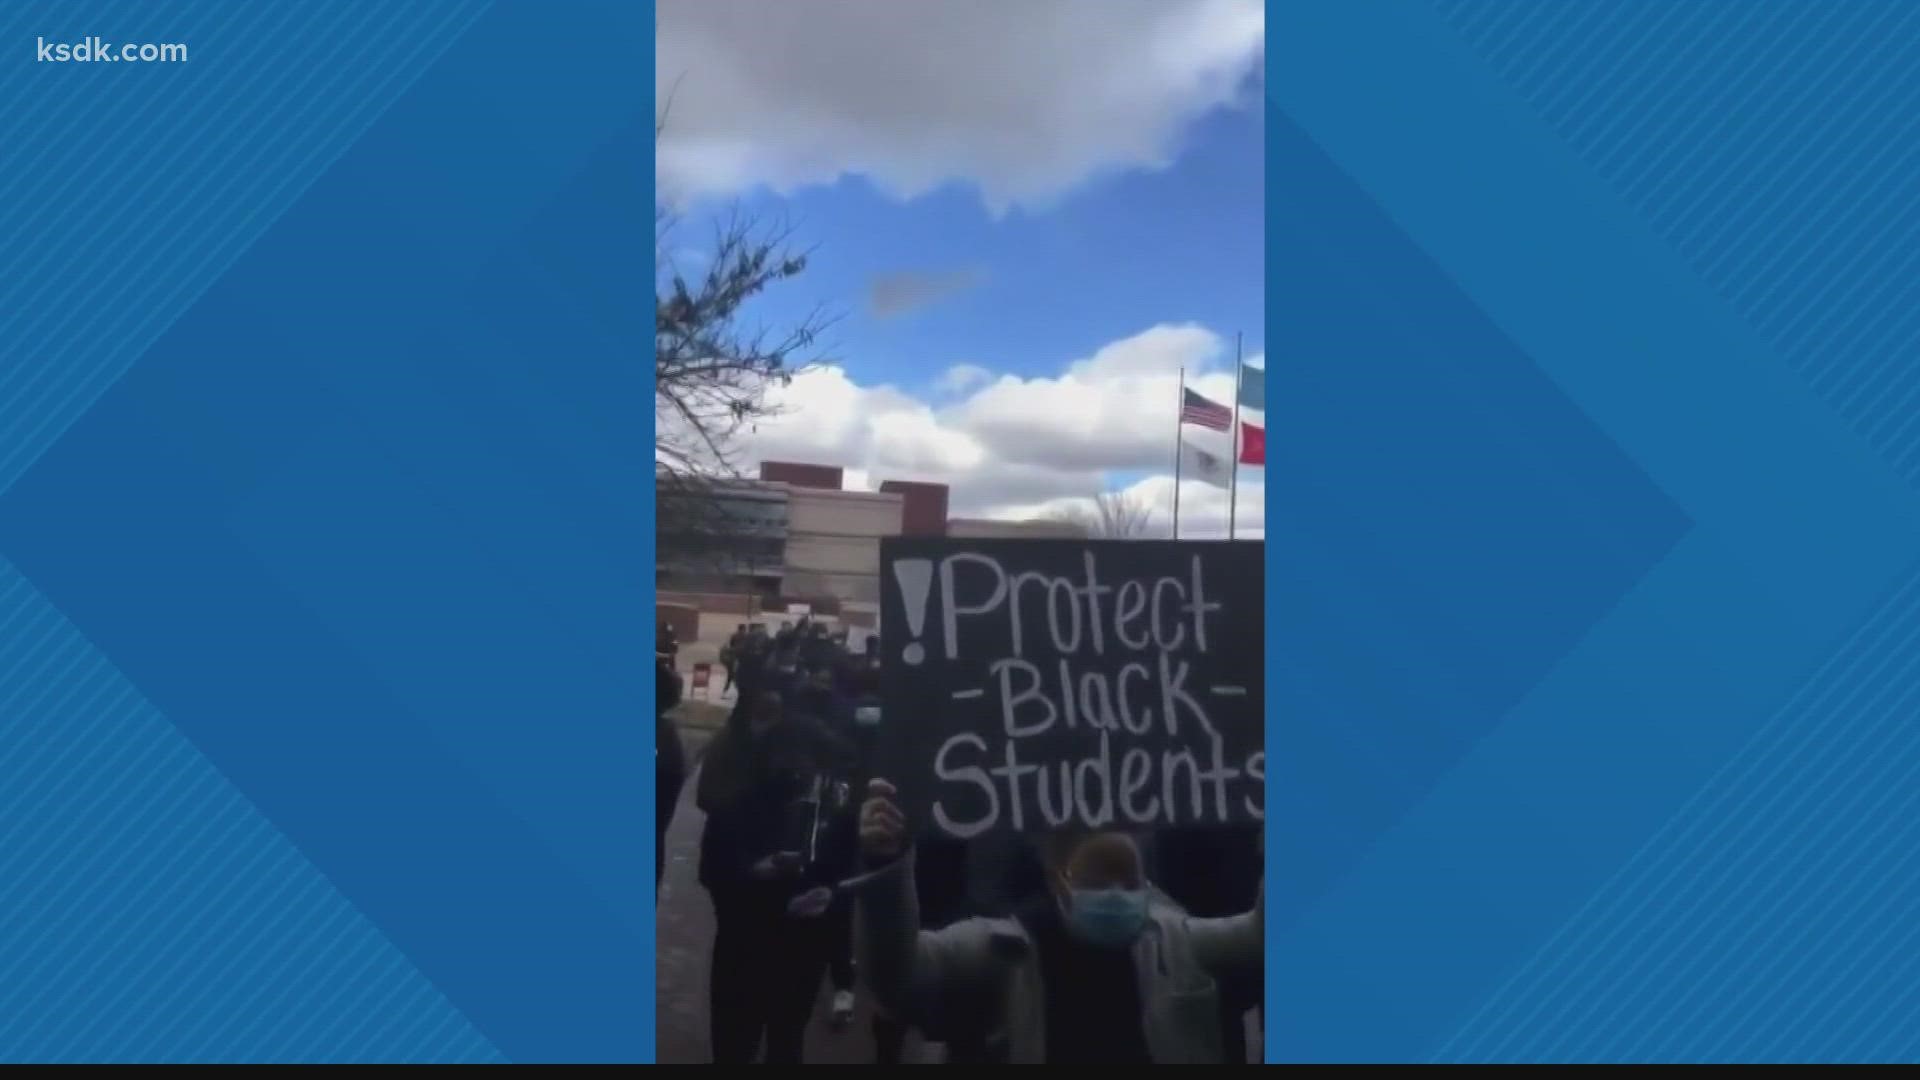 Students at SIUe are demanding action after they say a white student made racial slurs and death threats to a black girl on campus